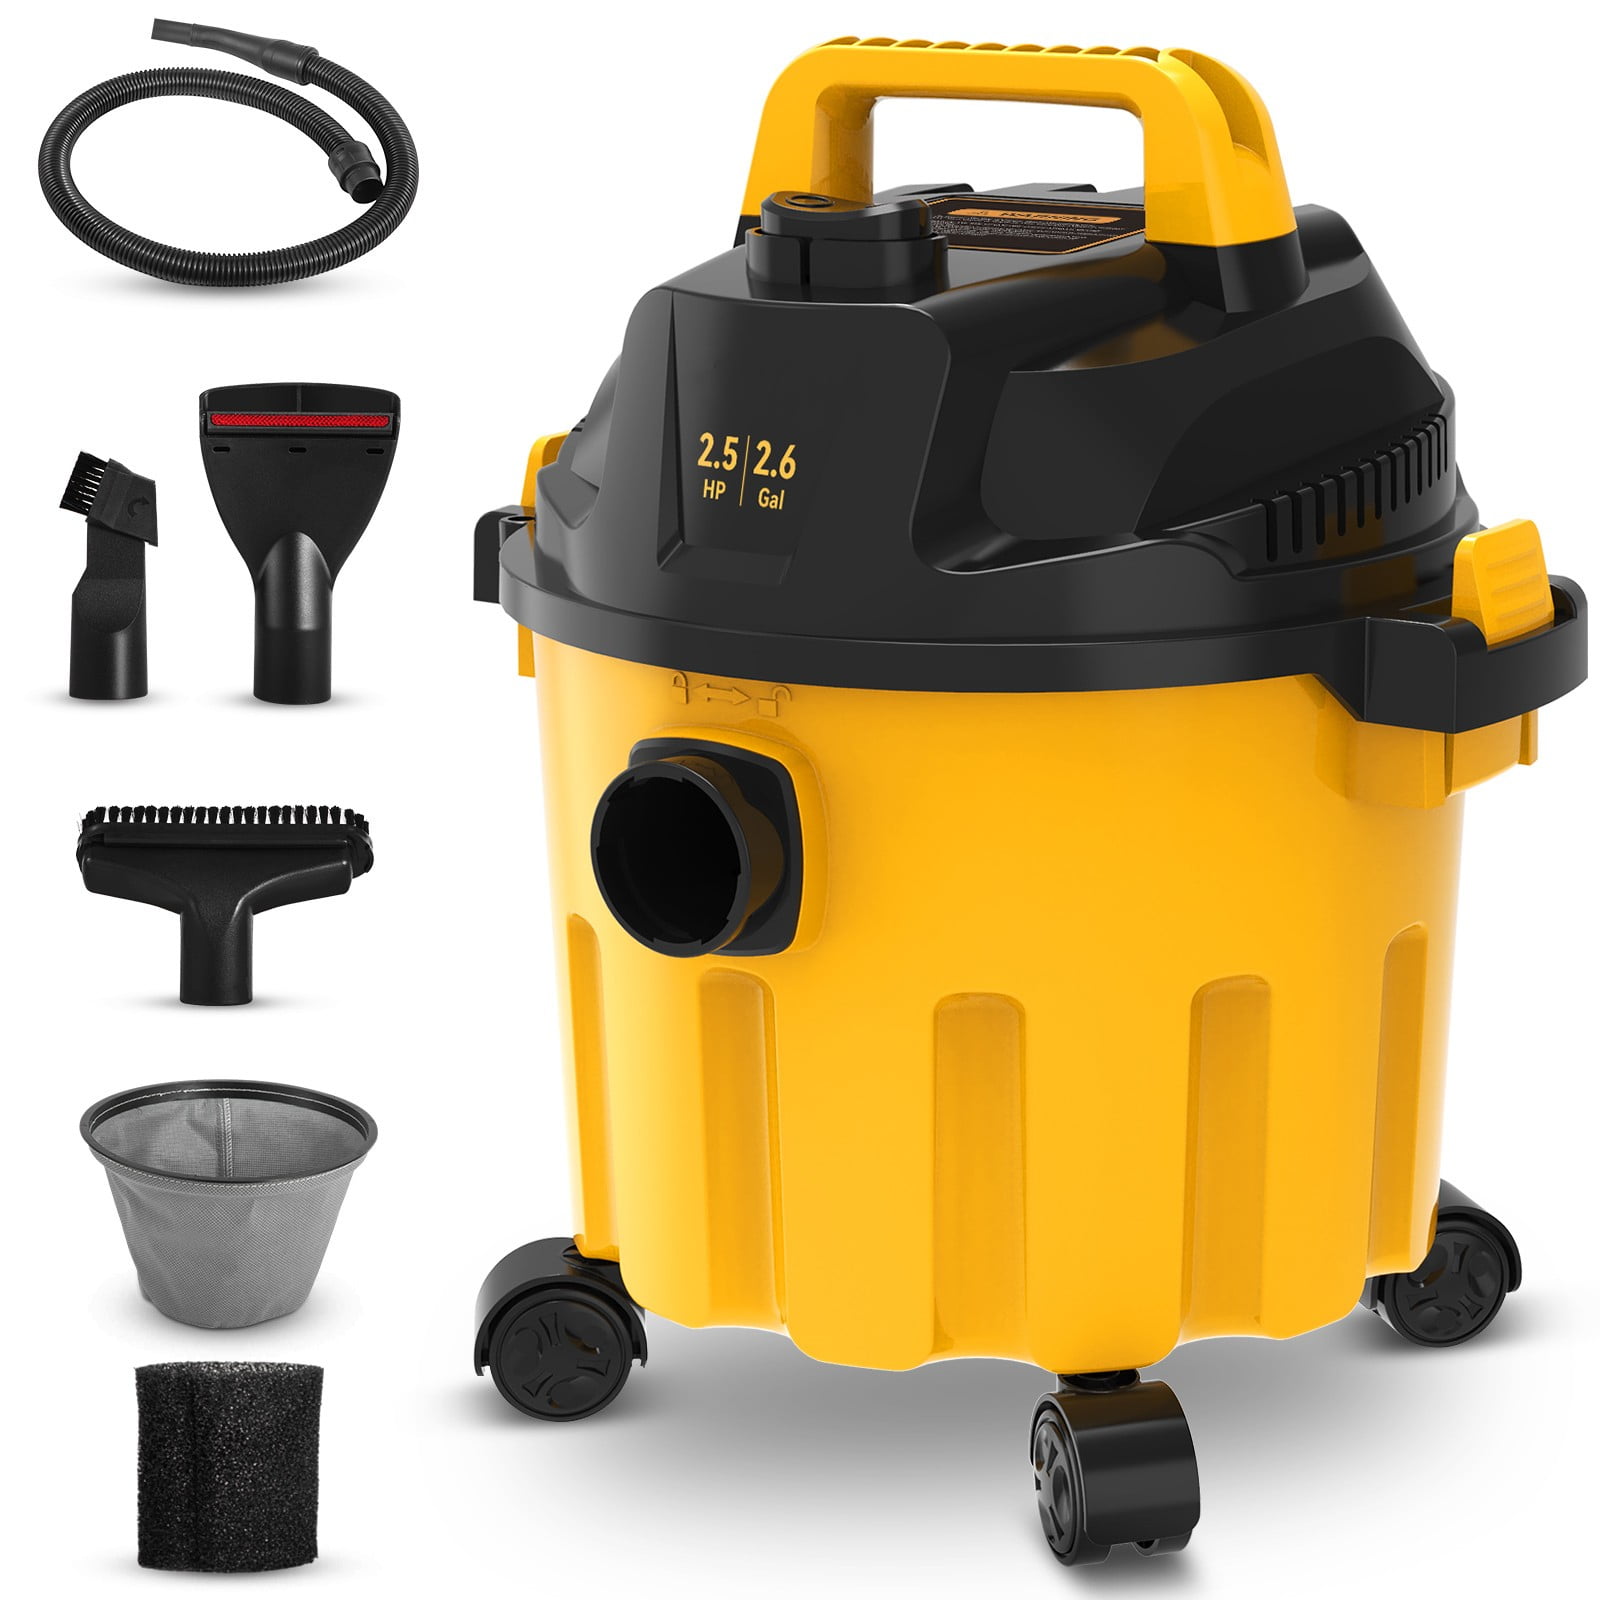 3 gal. Portable Wet/Dry Vacuum with Hose Accessories